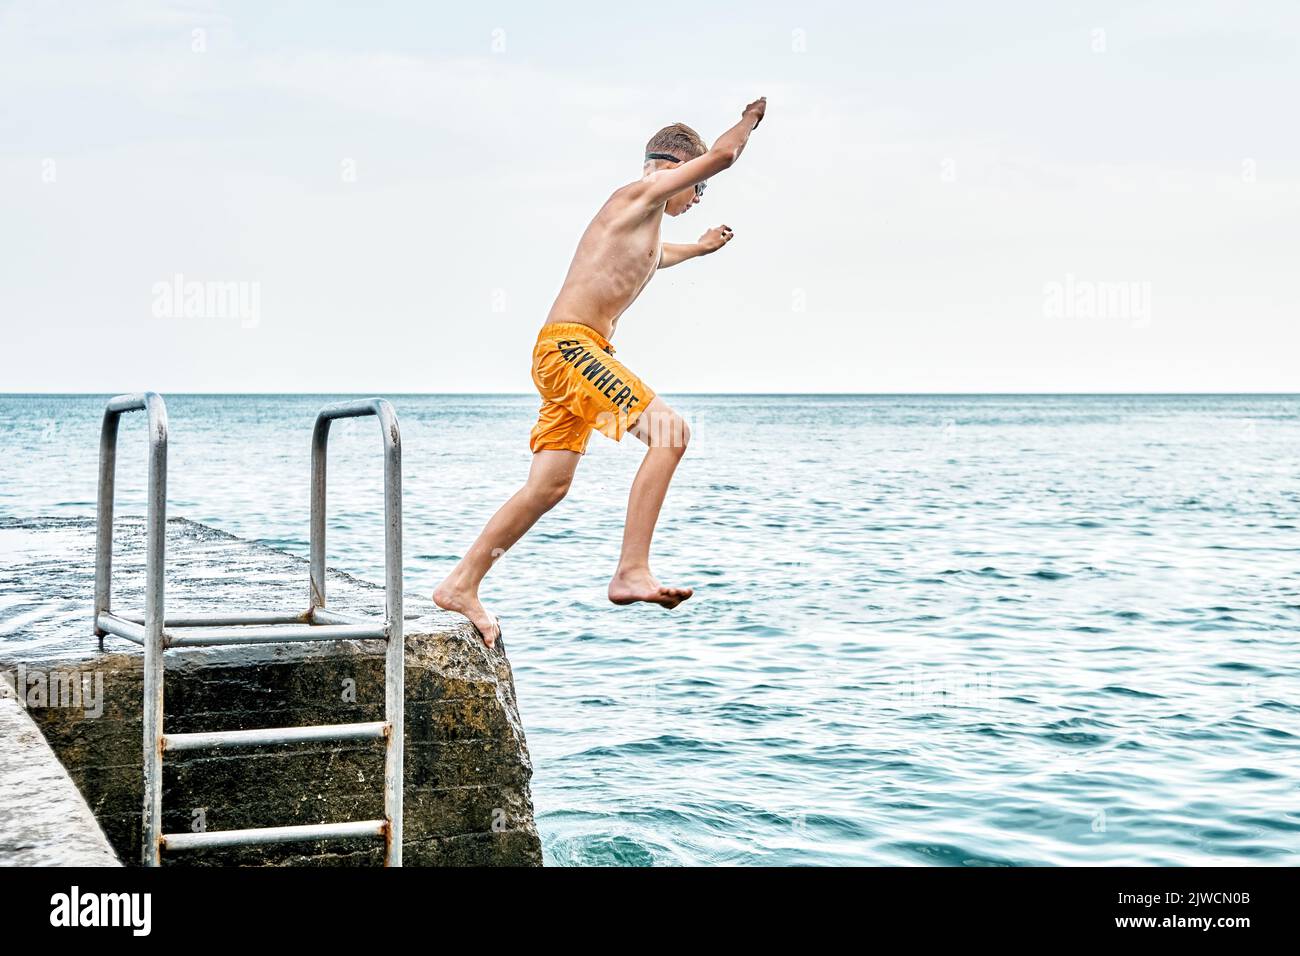 Moments of schoolboy jumping from stone pier with ladder into sea doing tricks in combined image sequence Stock Photo